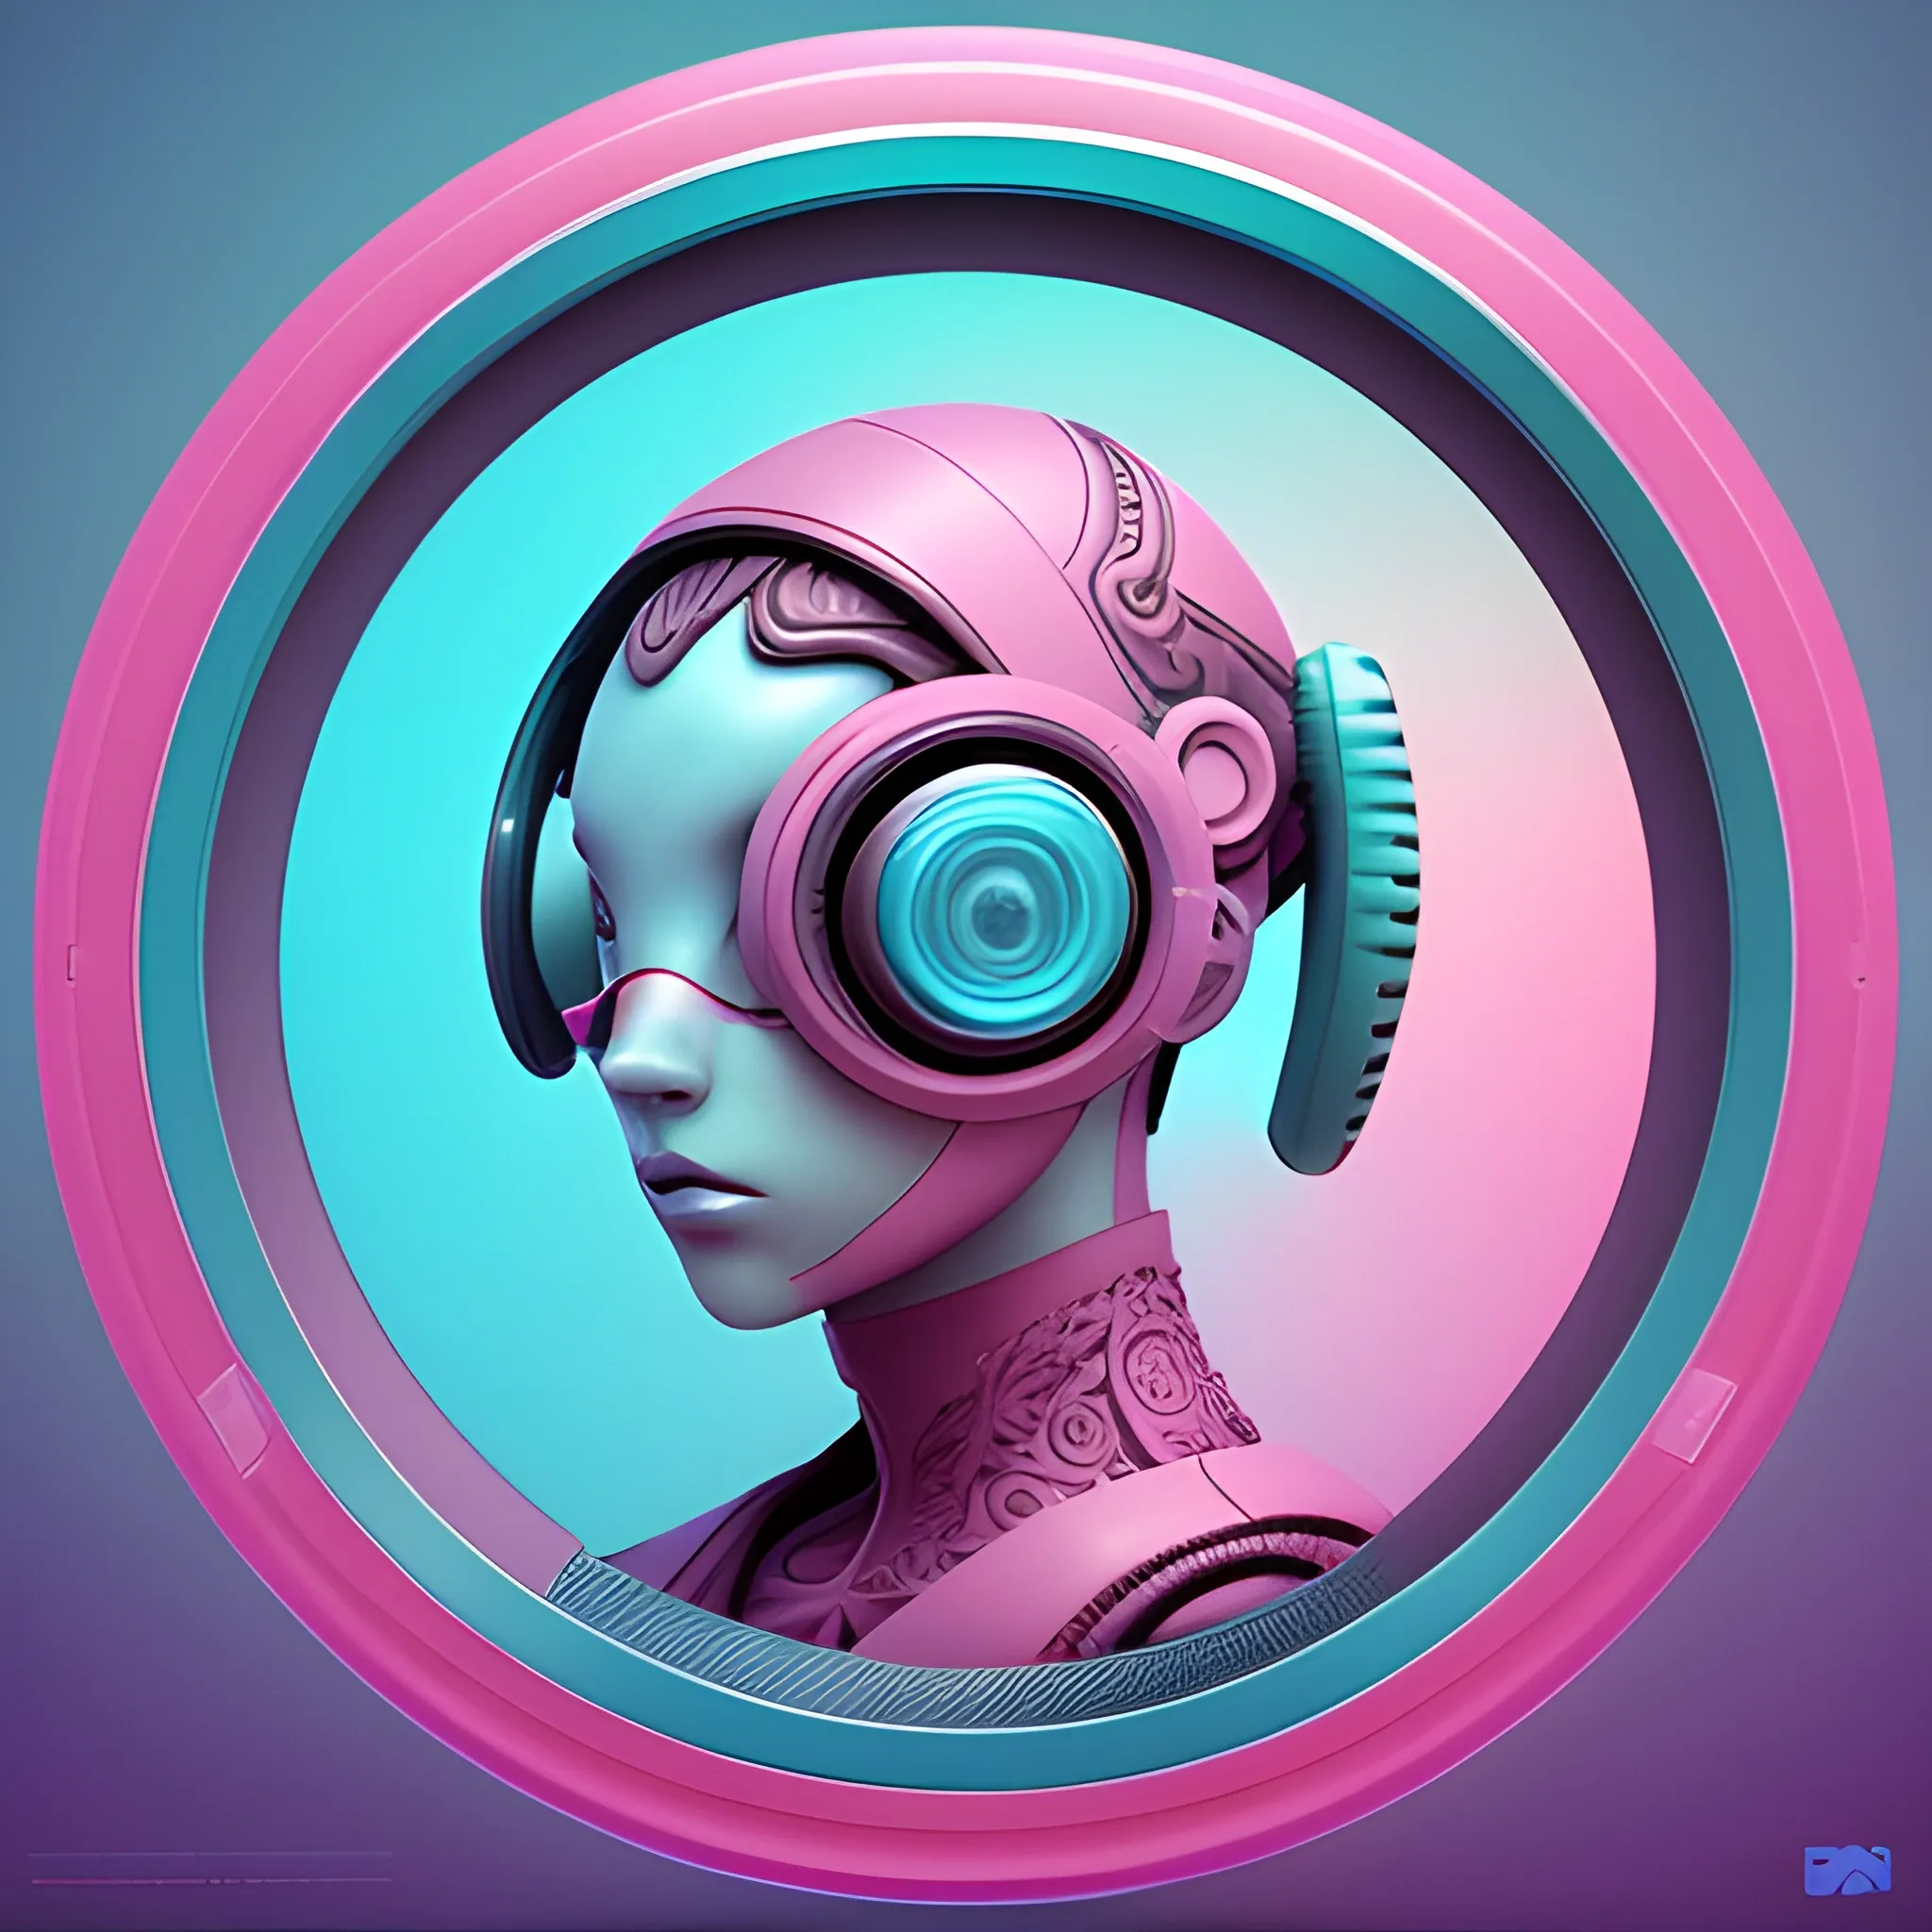 3D, Sci-Fi, Hip-hop, Urban, pink and cyan colored, circular avatar. high-definition, realistic, intricate wavelength detailing, embossed circular frame, 